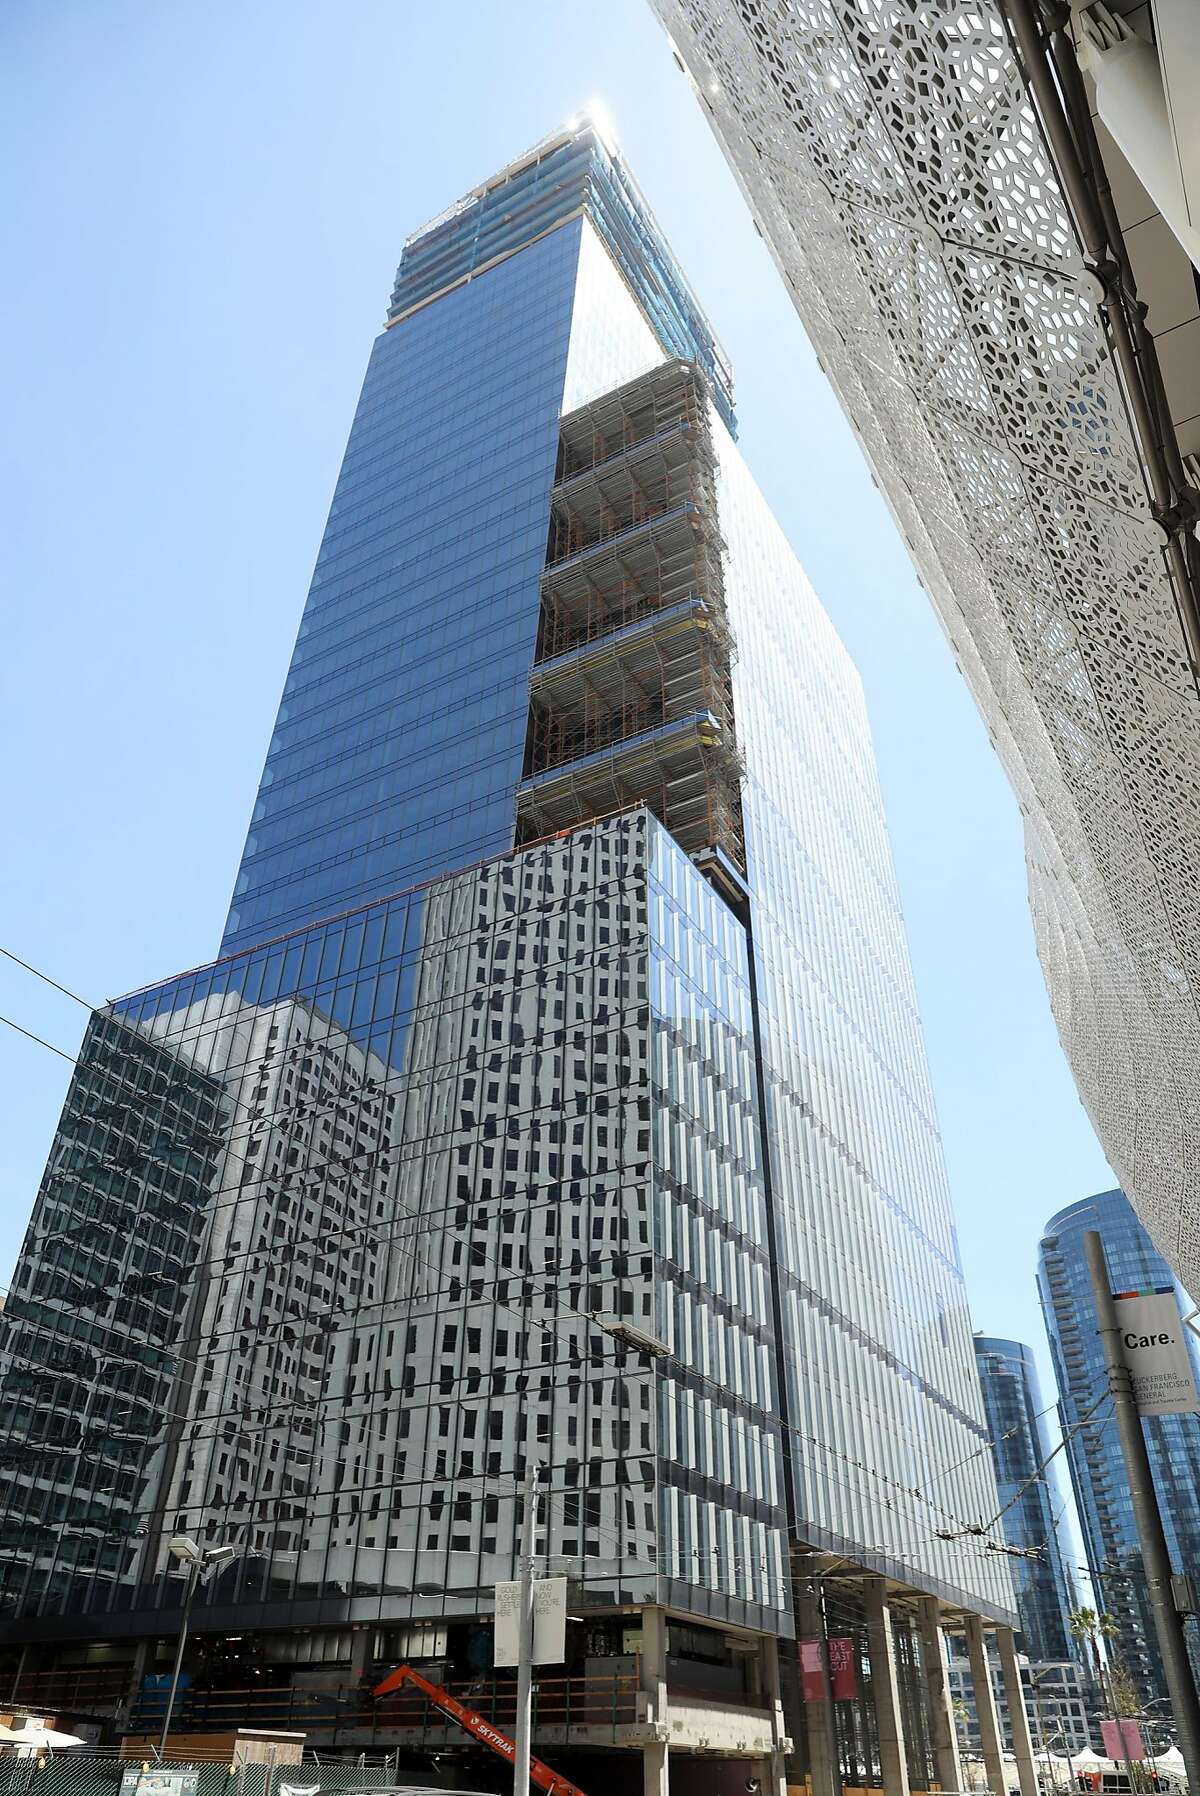 The Park Tower at Transbay is being built at 520 Howard Street in San Francisco, CA on Friday, May 11, 2018.